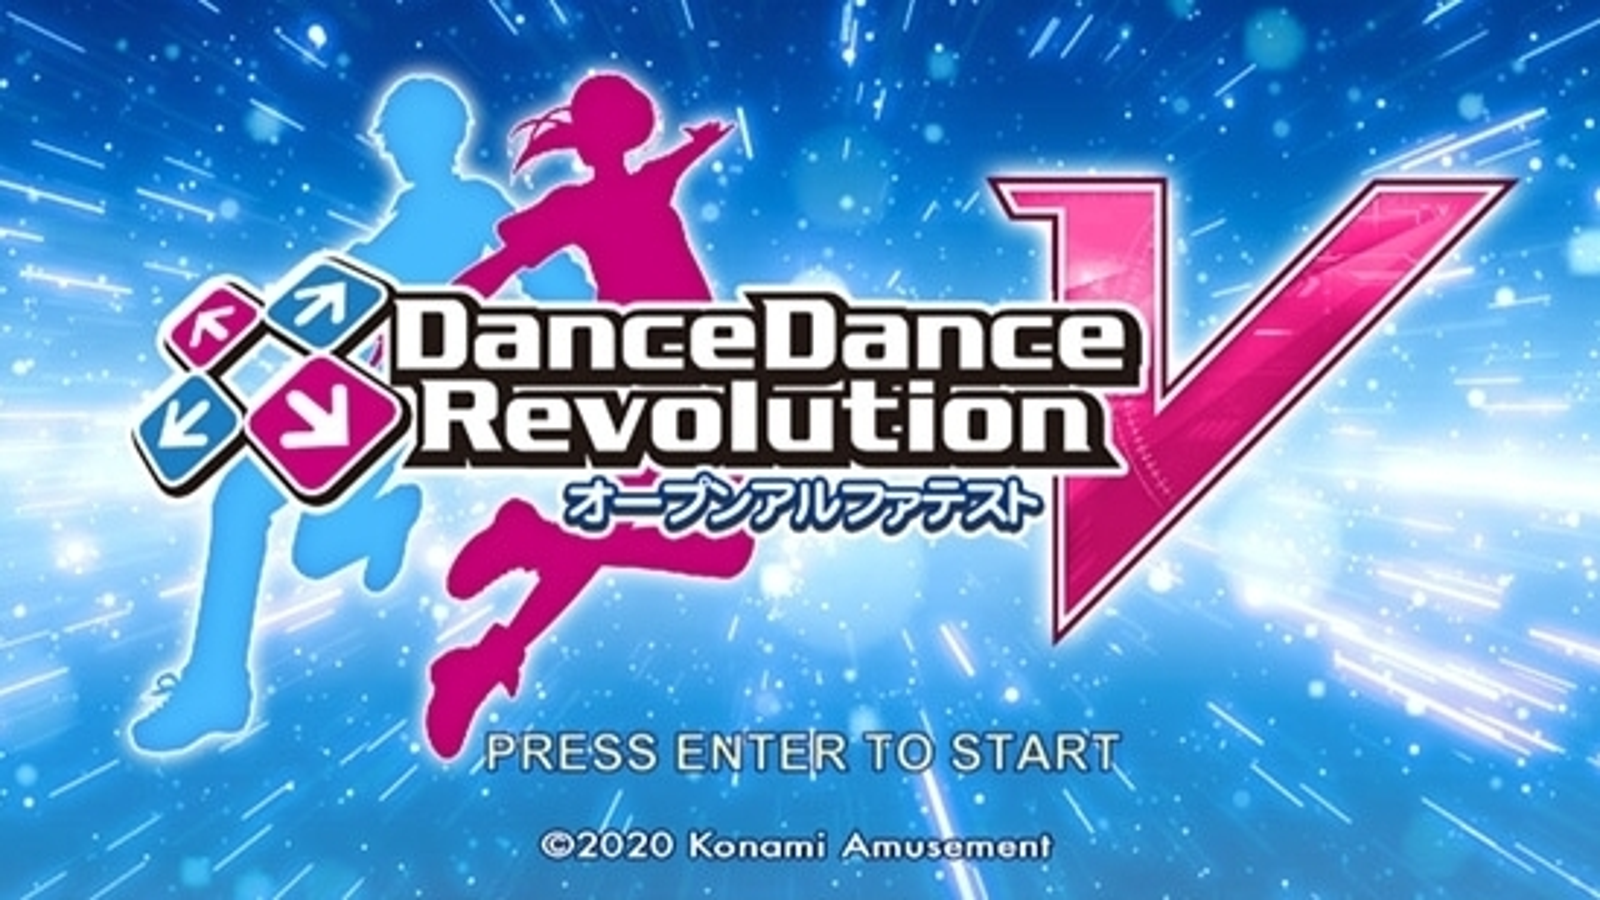 https://assetsio.gnwcdn.com/konami-releases-dance-dance-revolution-v-as-a-browser-game-1589462762728.jpg?width=1600&height=900&fit=crop&quality=100&format=png&enable=upscale&auto=webp